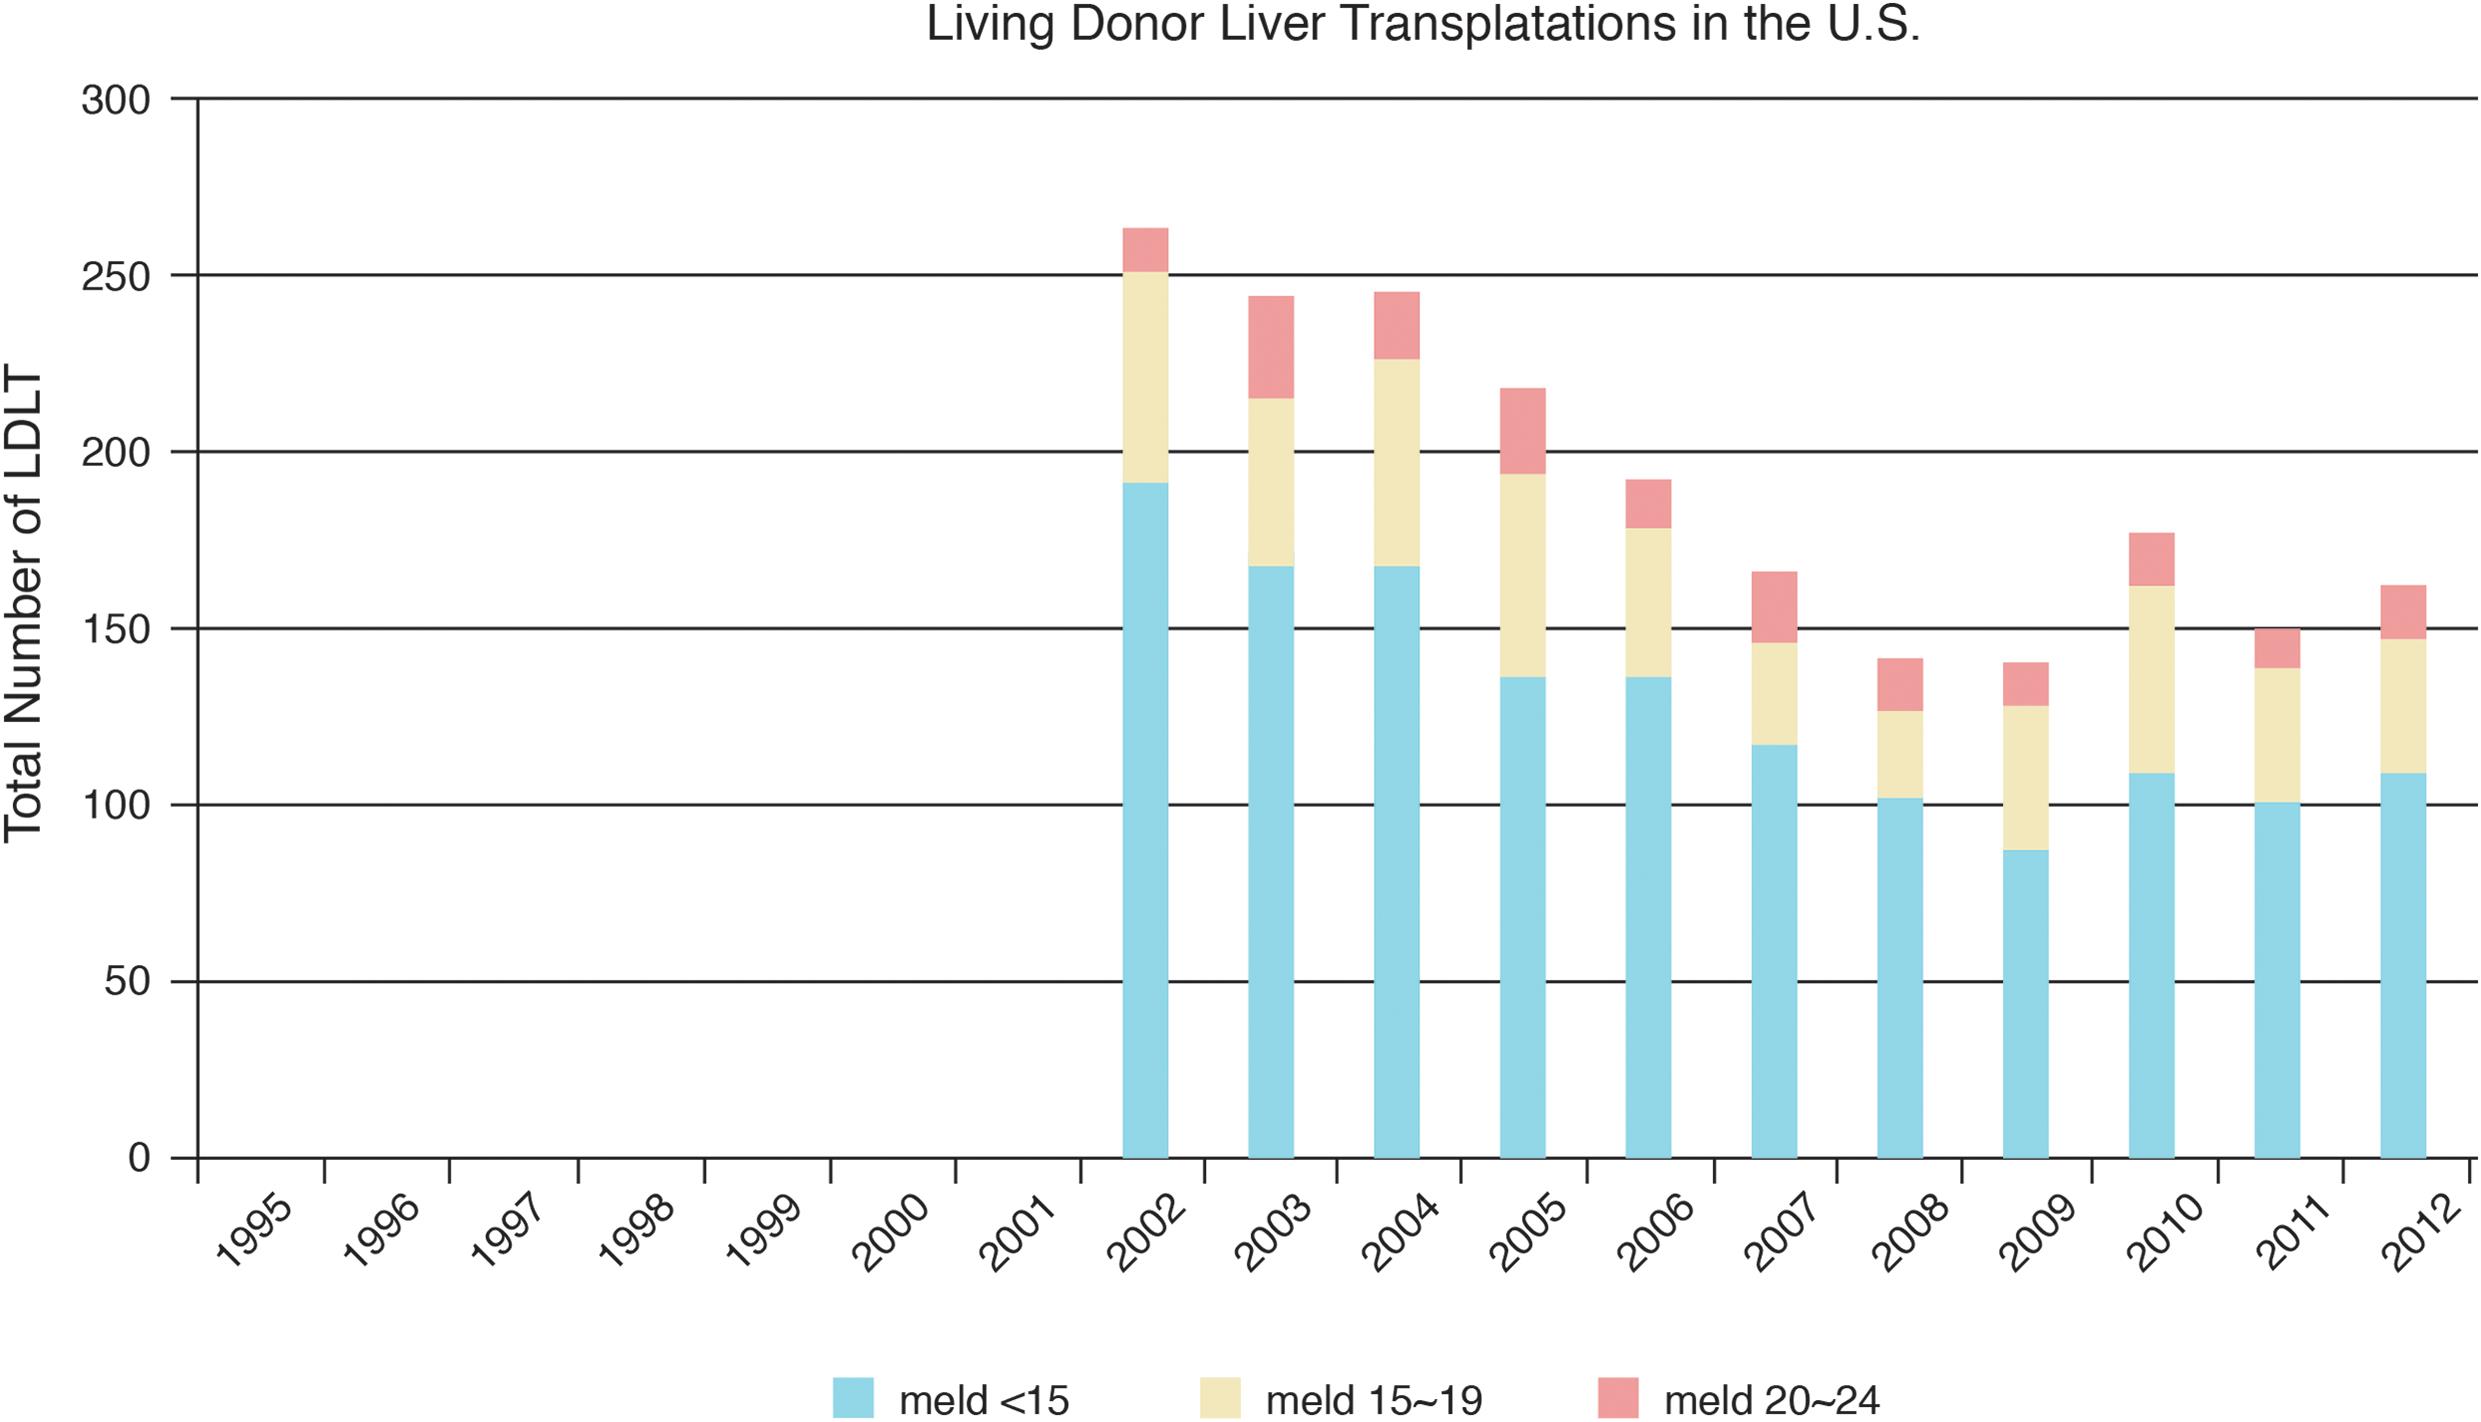 Annual U.S. living donor liver transplantations by MELD score categories.